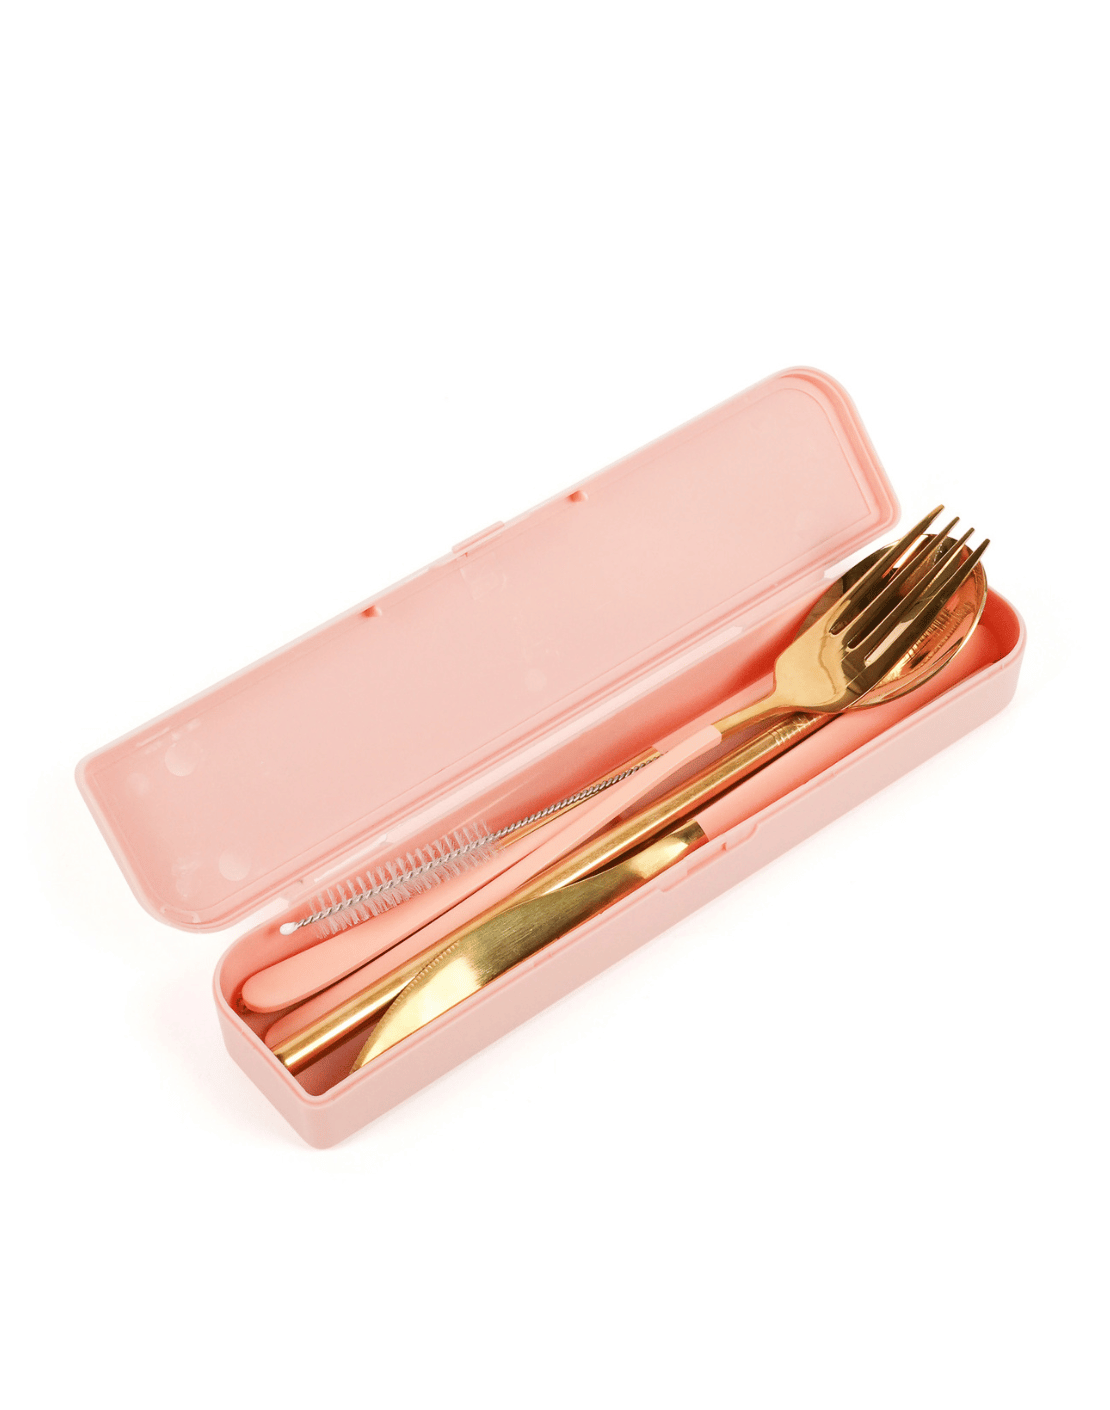 Cutlery Kit - Gold with Blush Handle (PRE-ORDER)